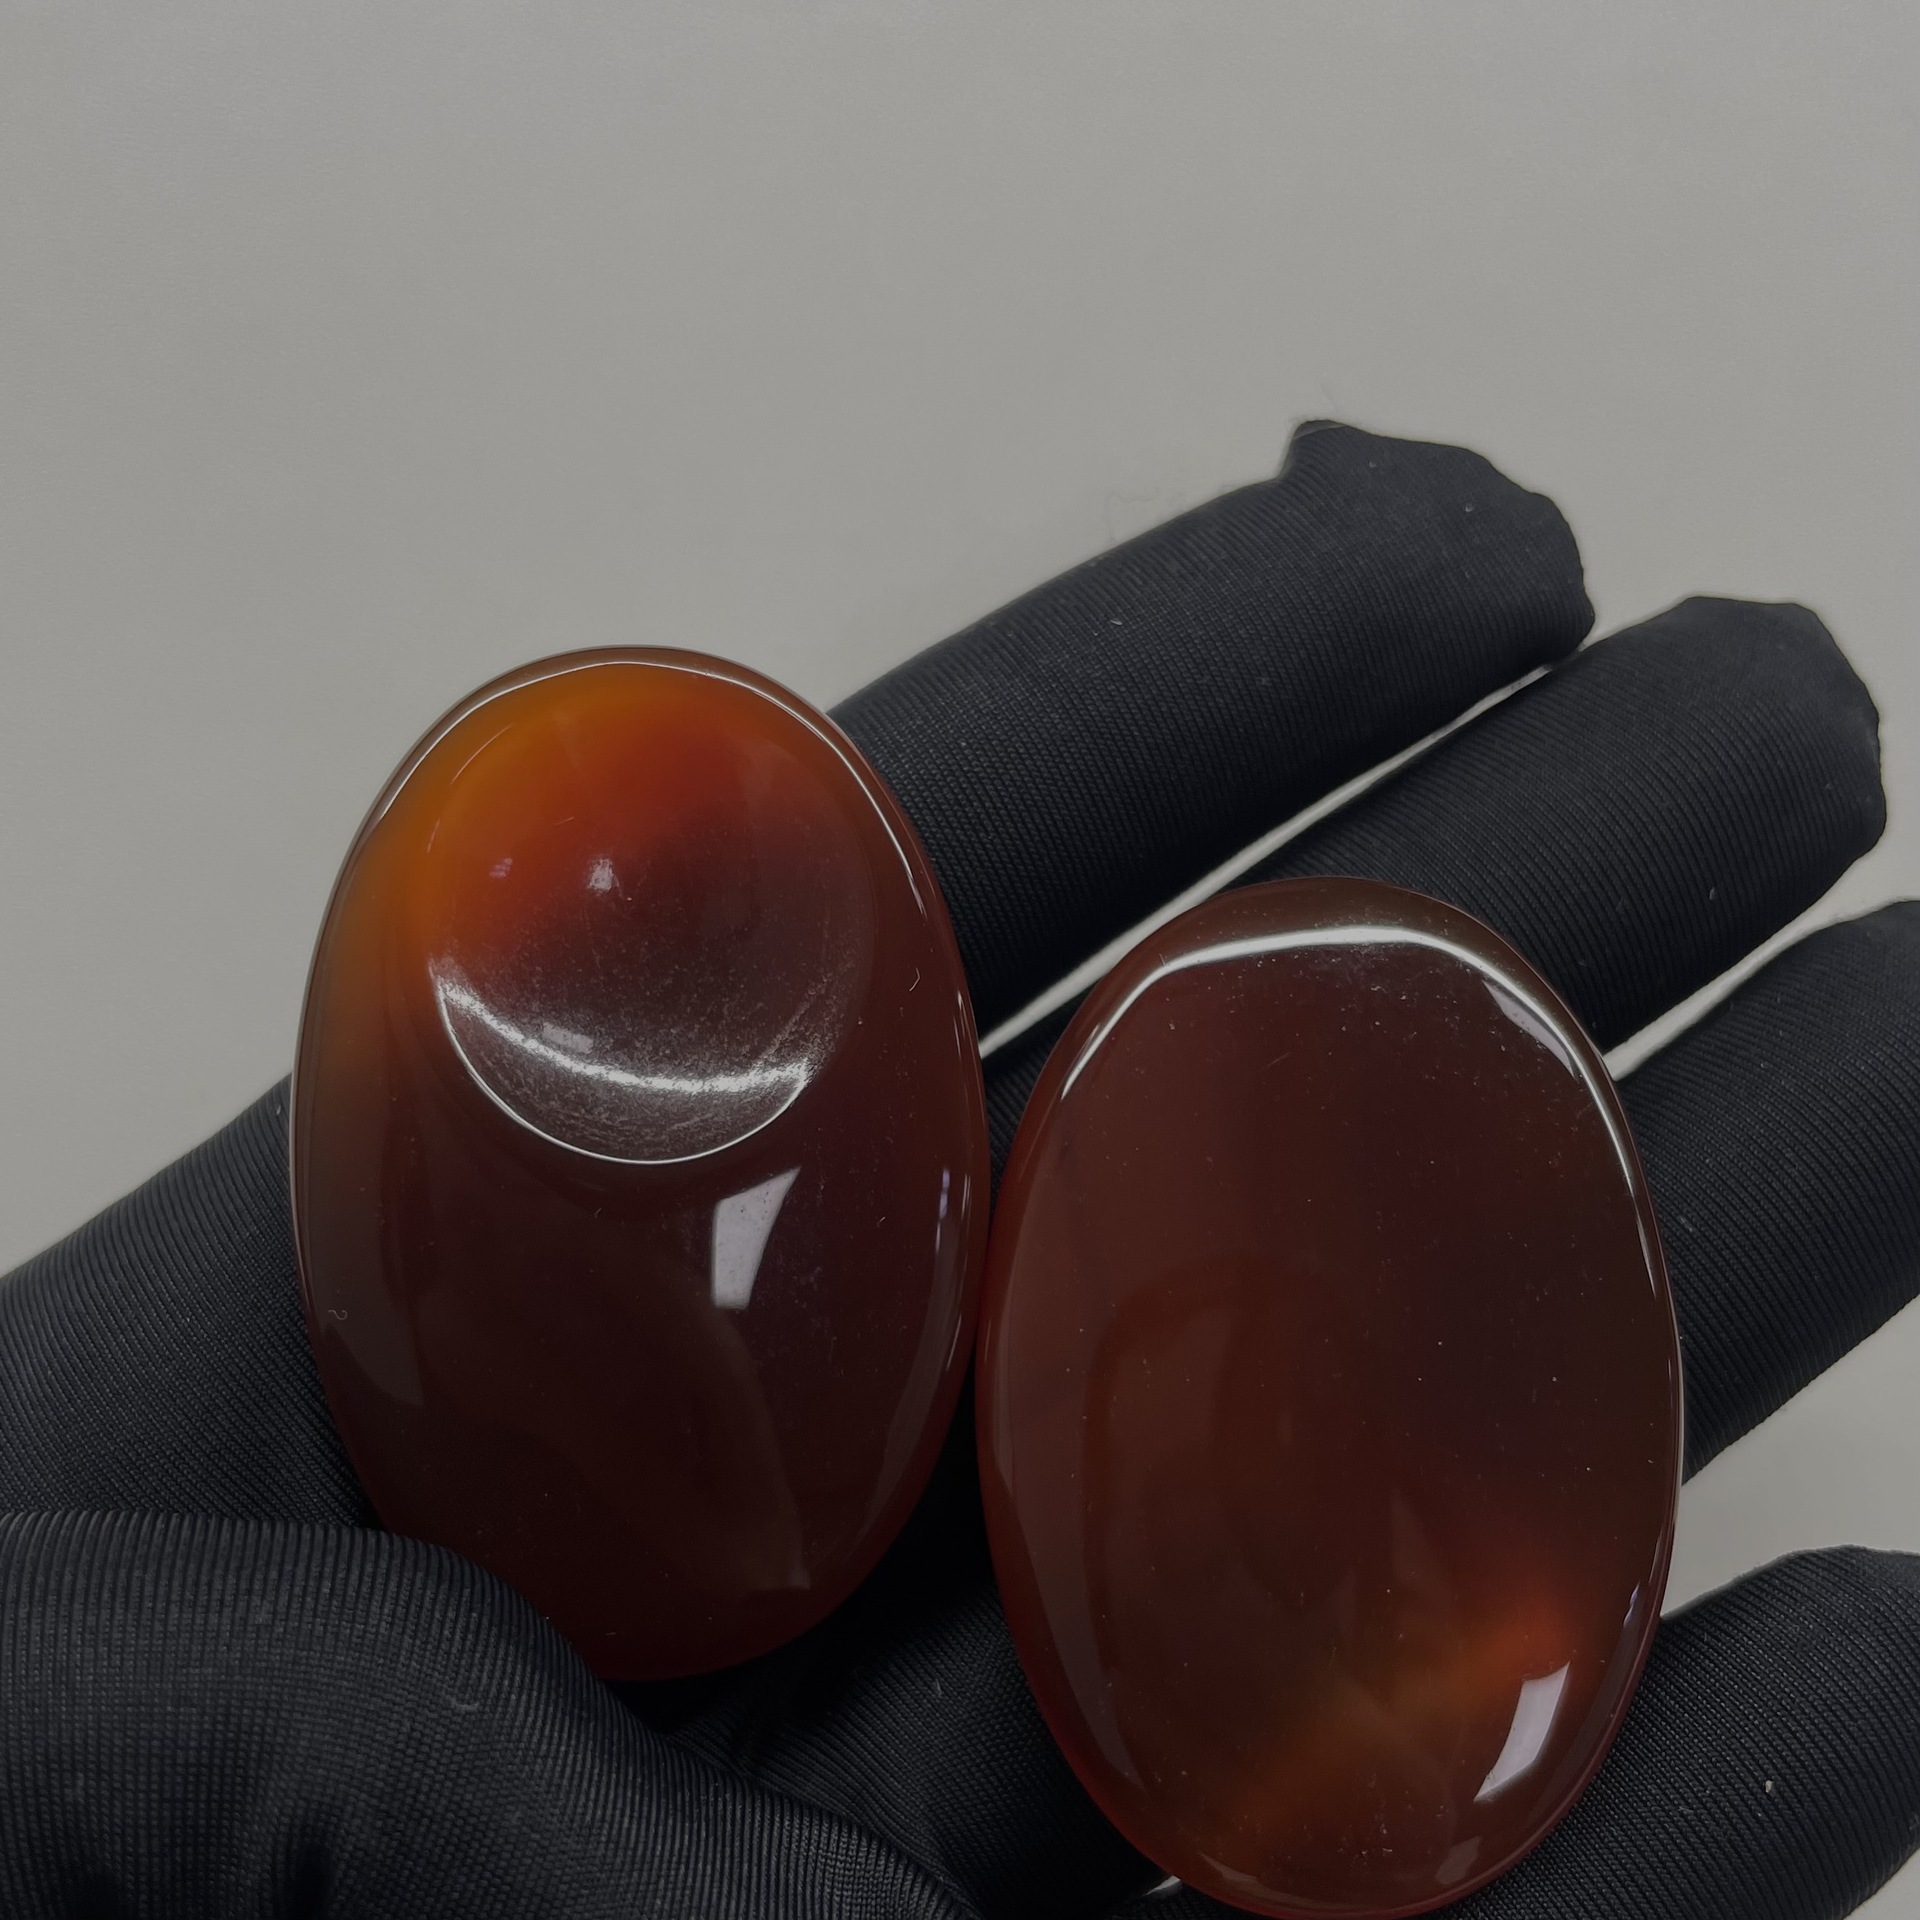 11:Red Agate